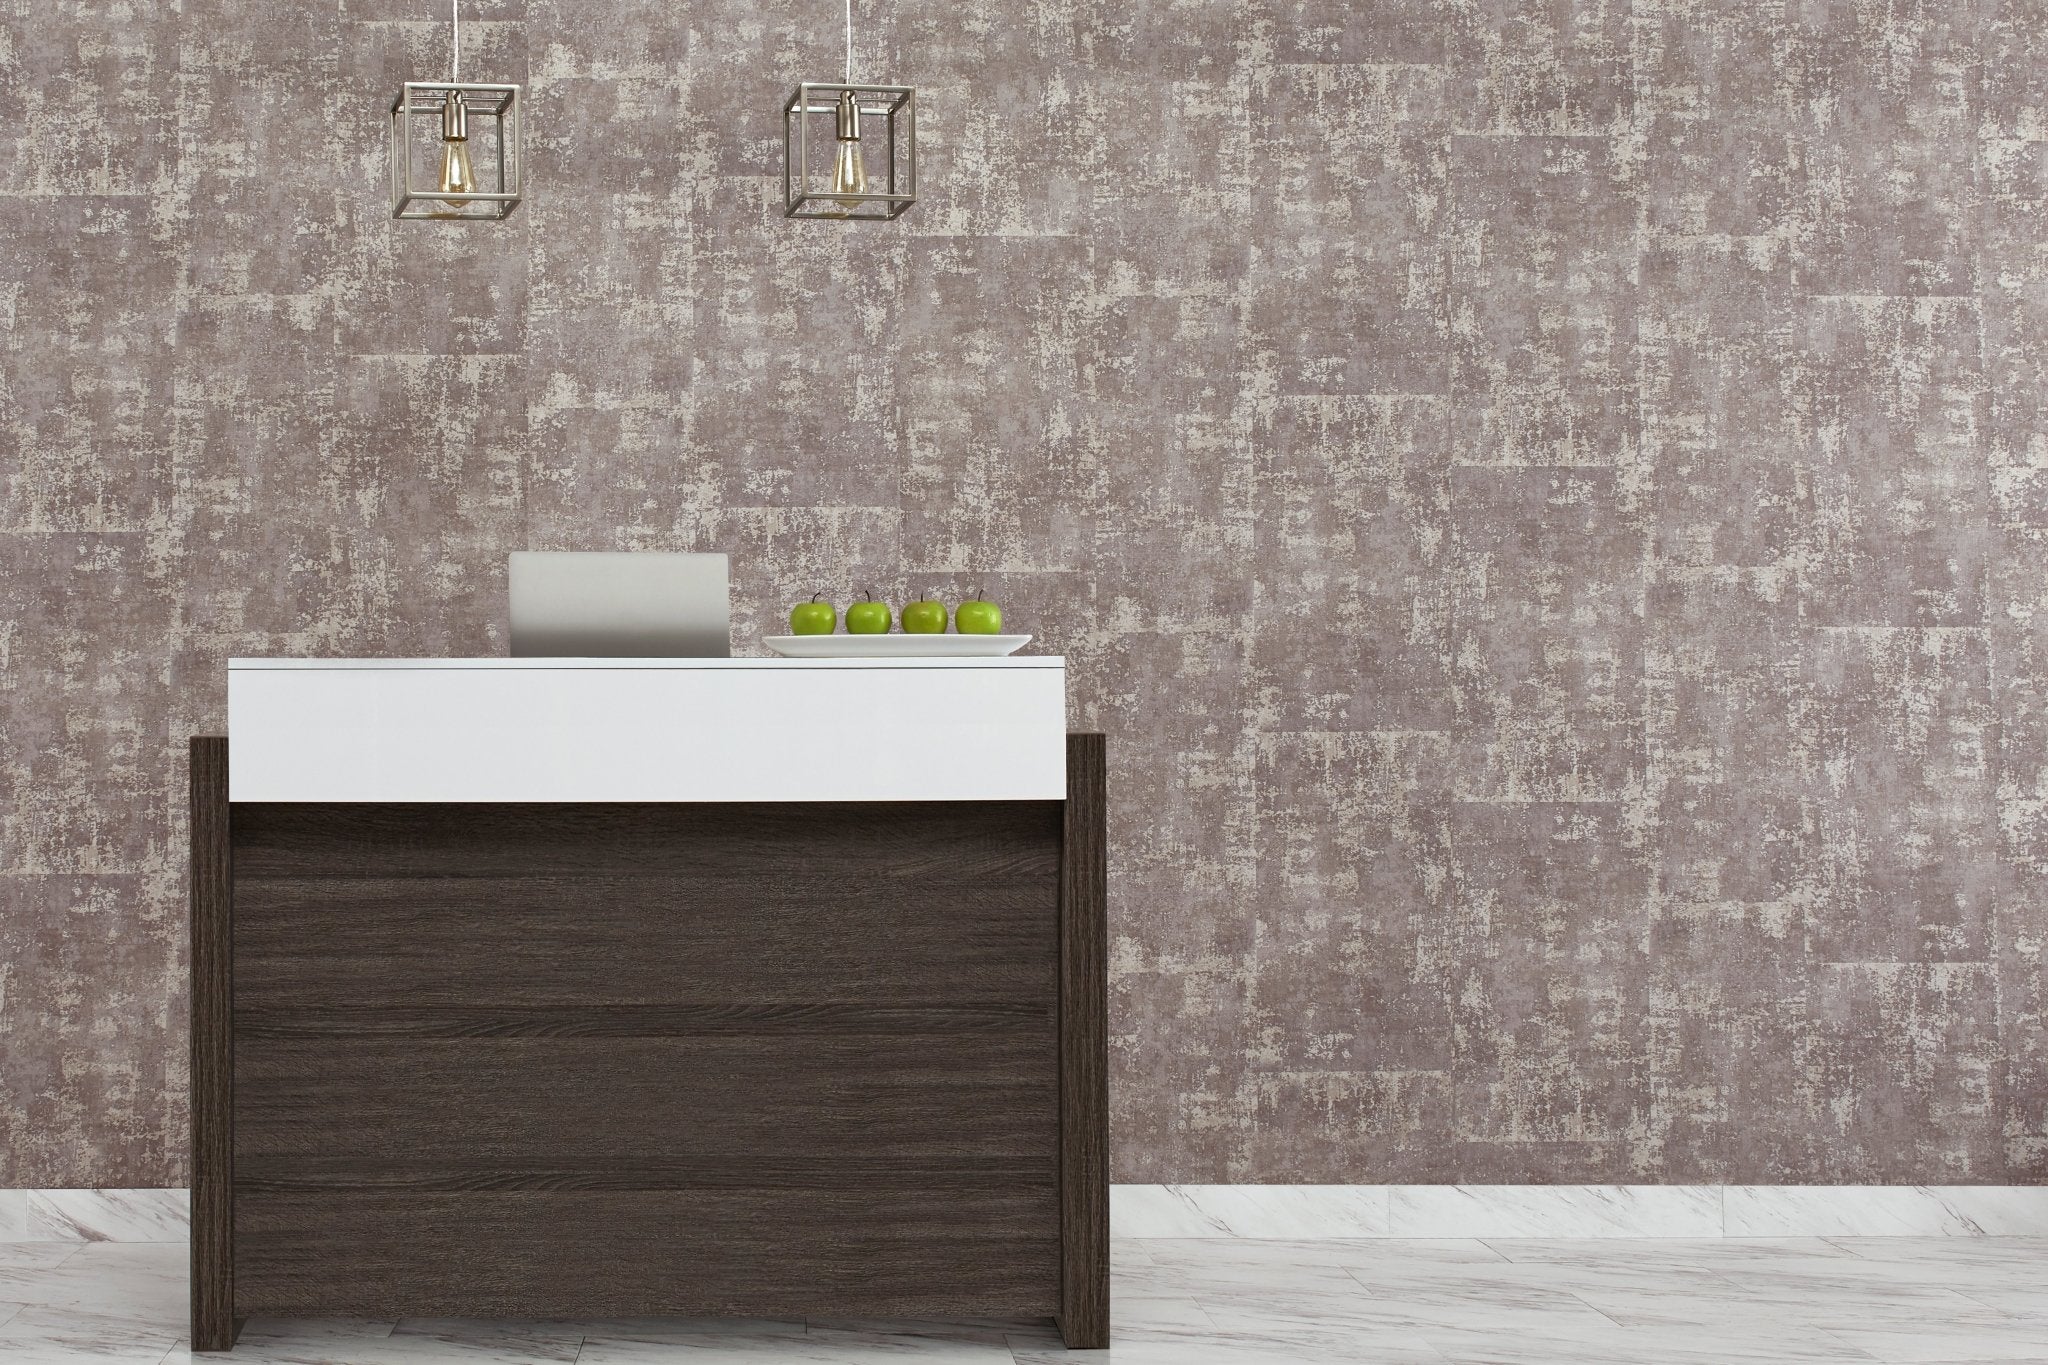 Set in Stone - Y47825 - Wallcovering - Vycon - Kube Contract